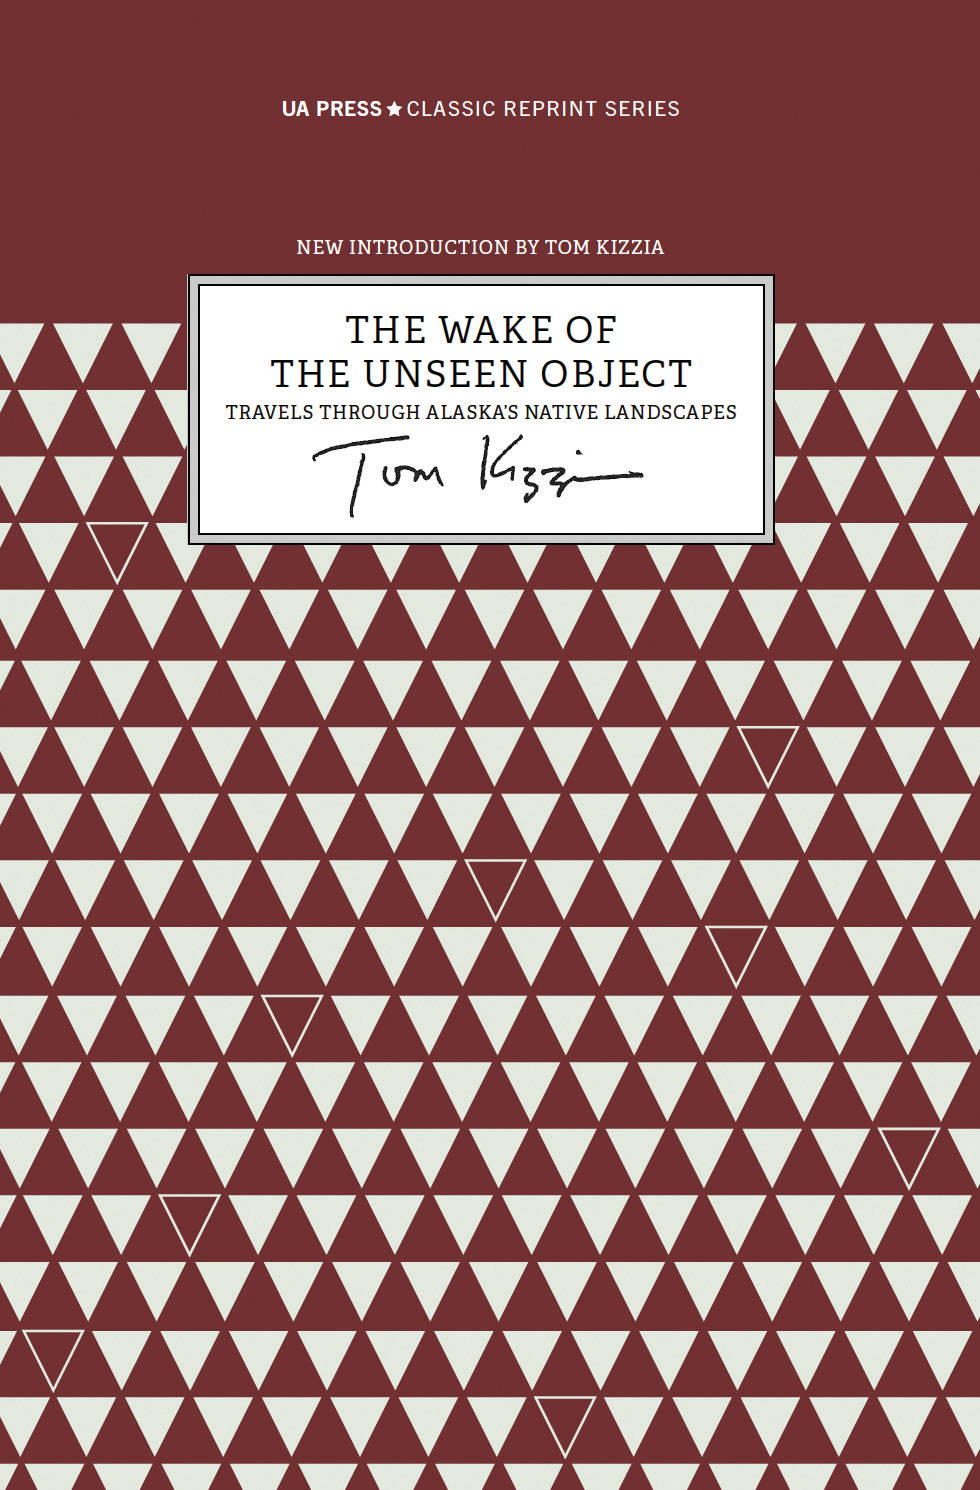 The cover of the reprint of Tom Kizzia’s “The Wake of the Unseen Object.” (Photo courtesy of University of Alaska Press)